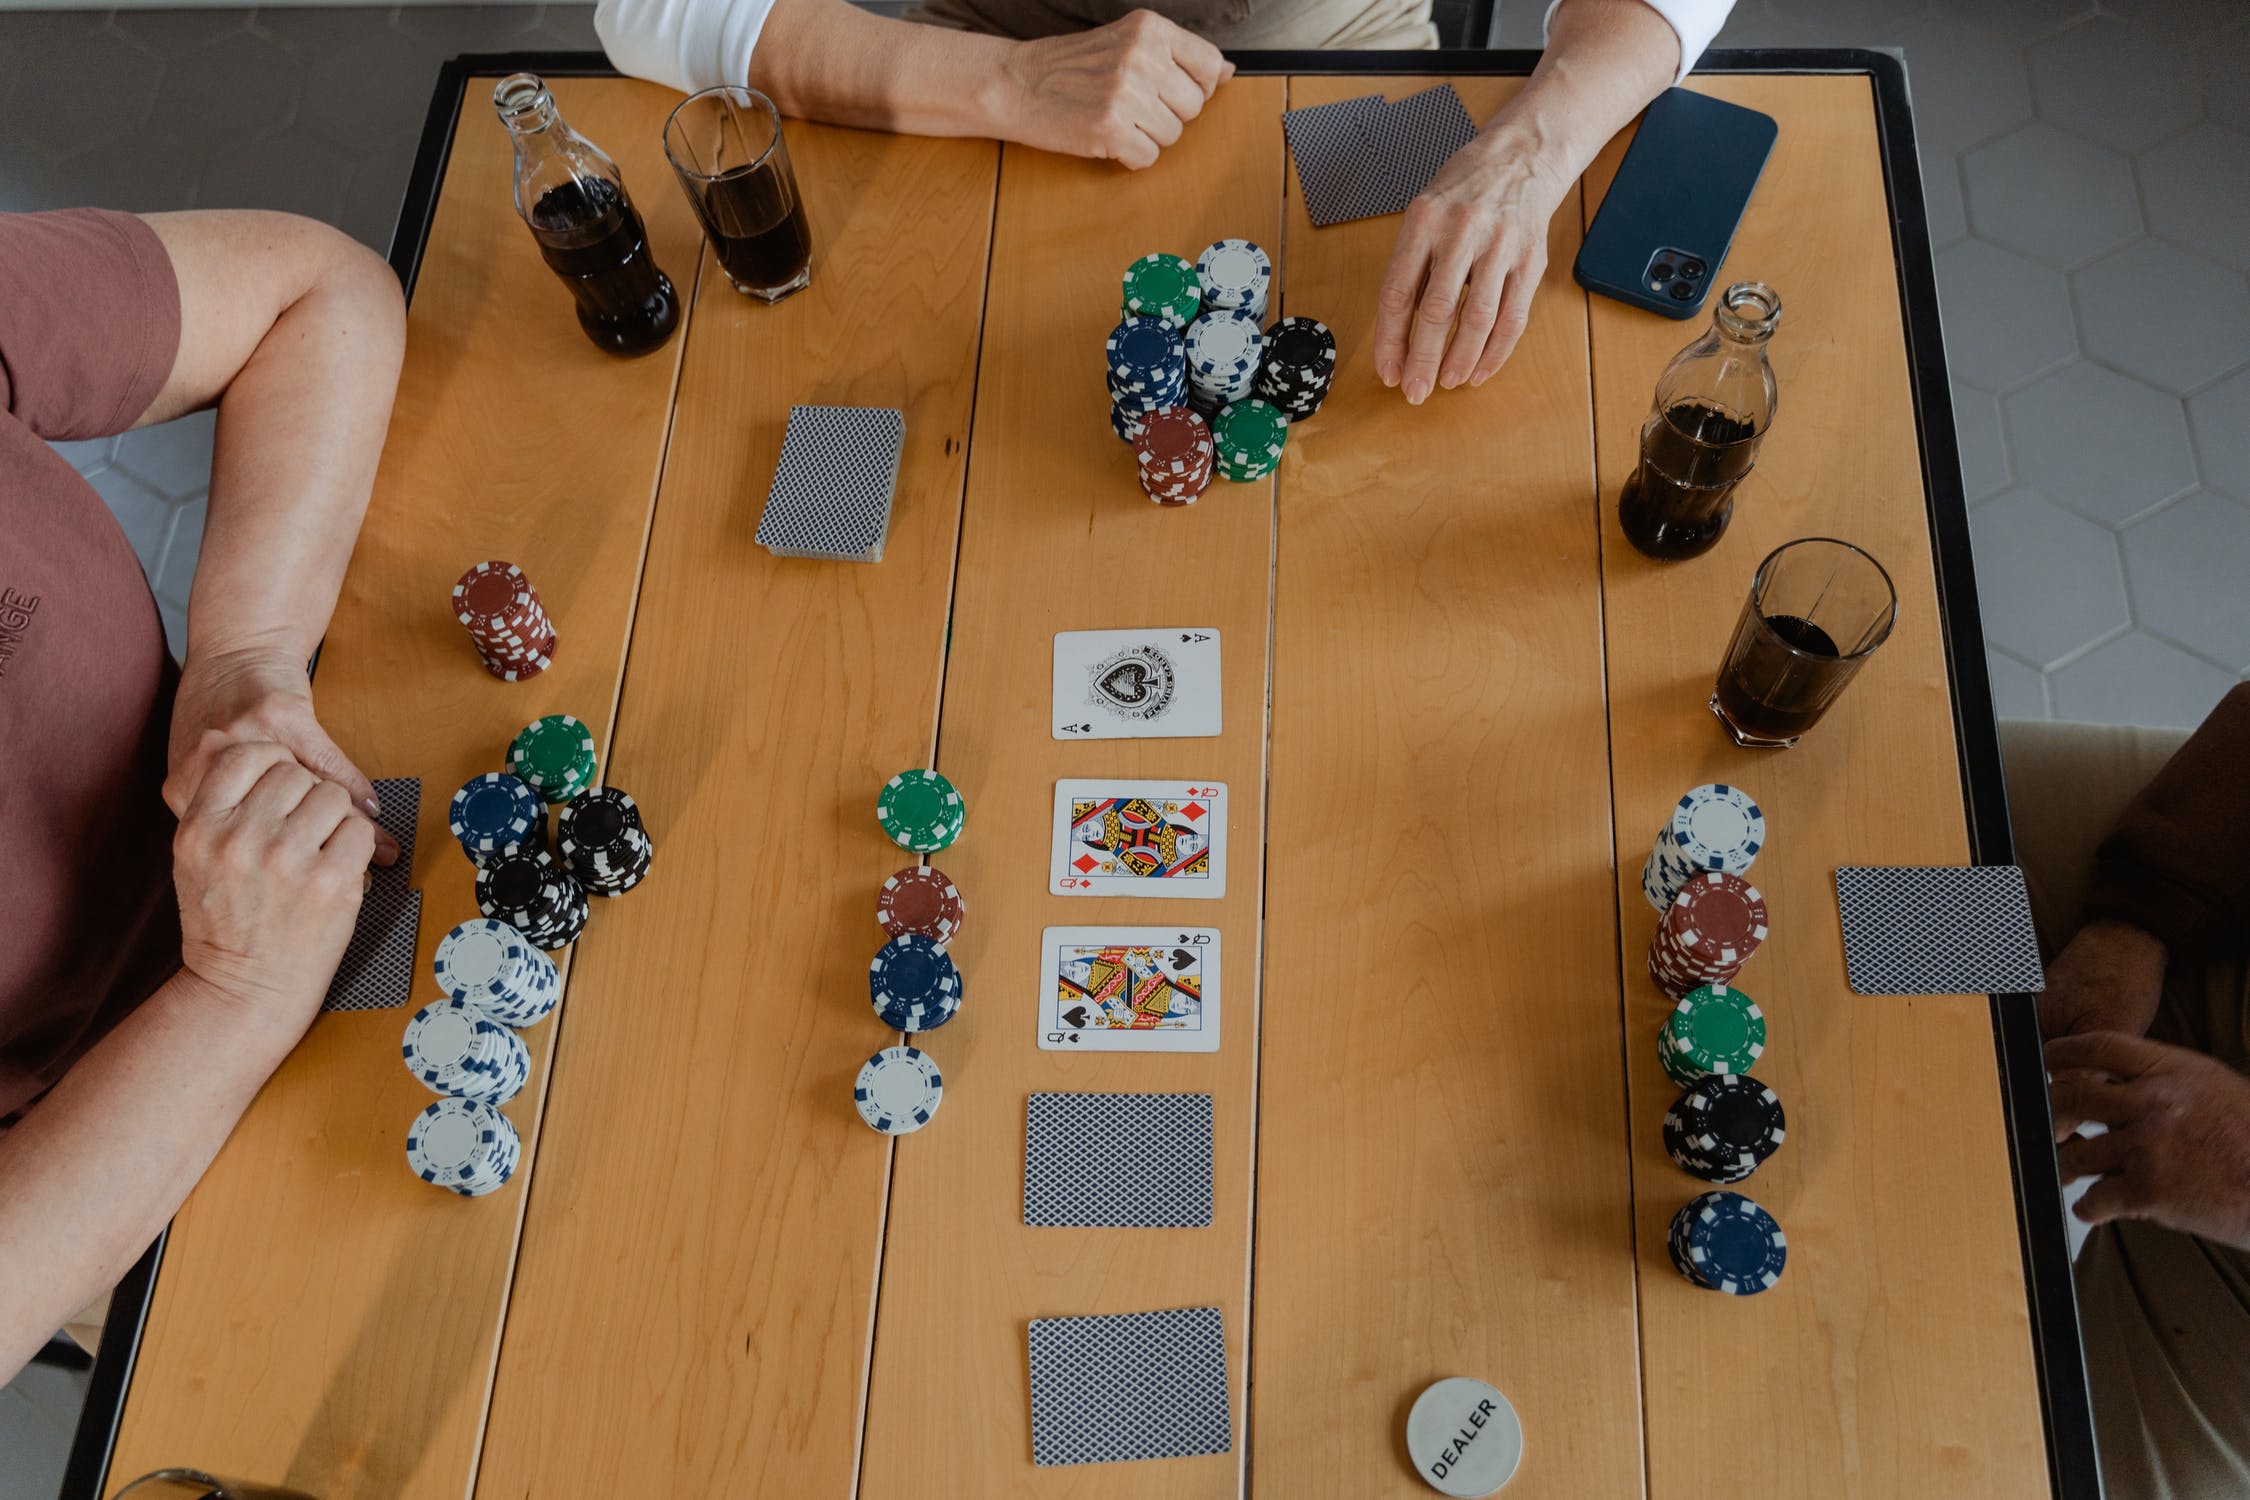 How to start your own Poker gaming business in 2021